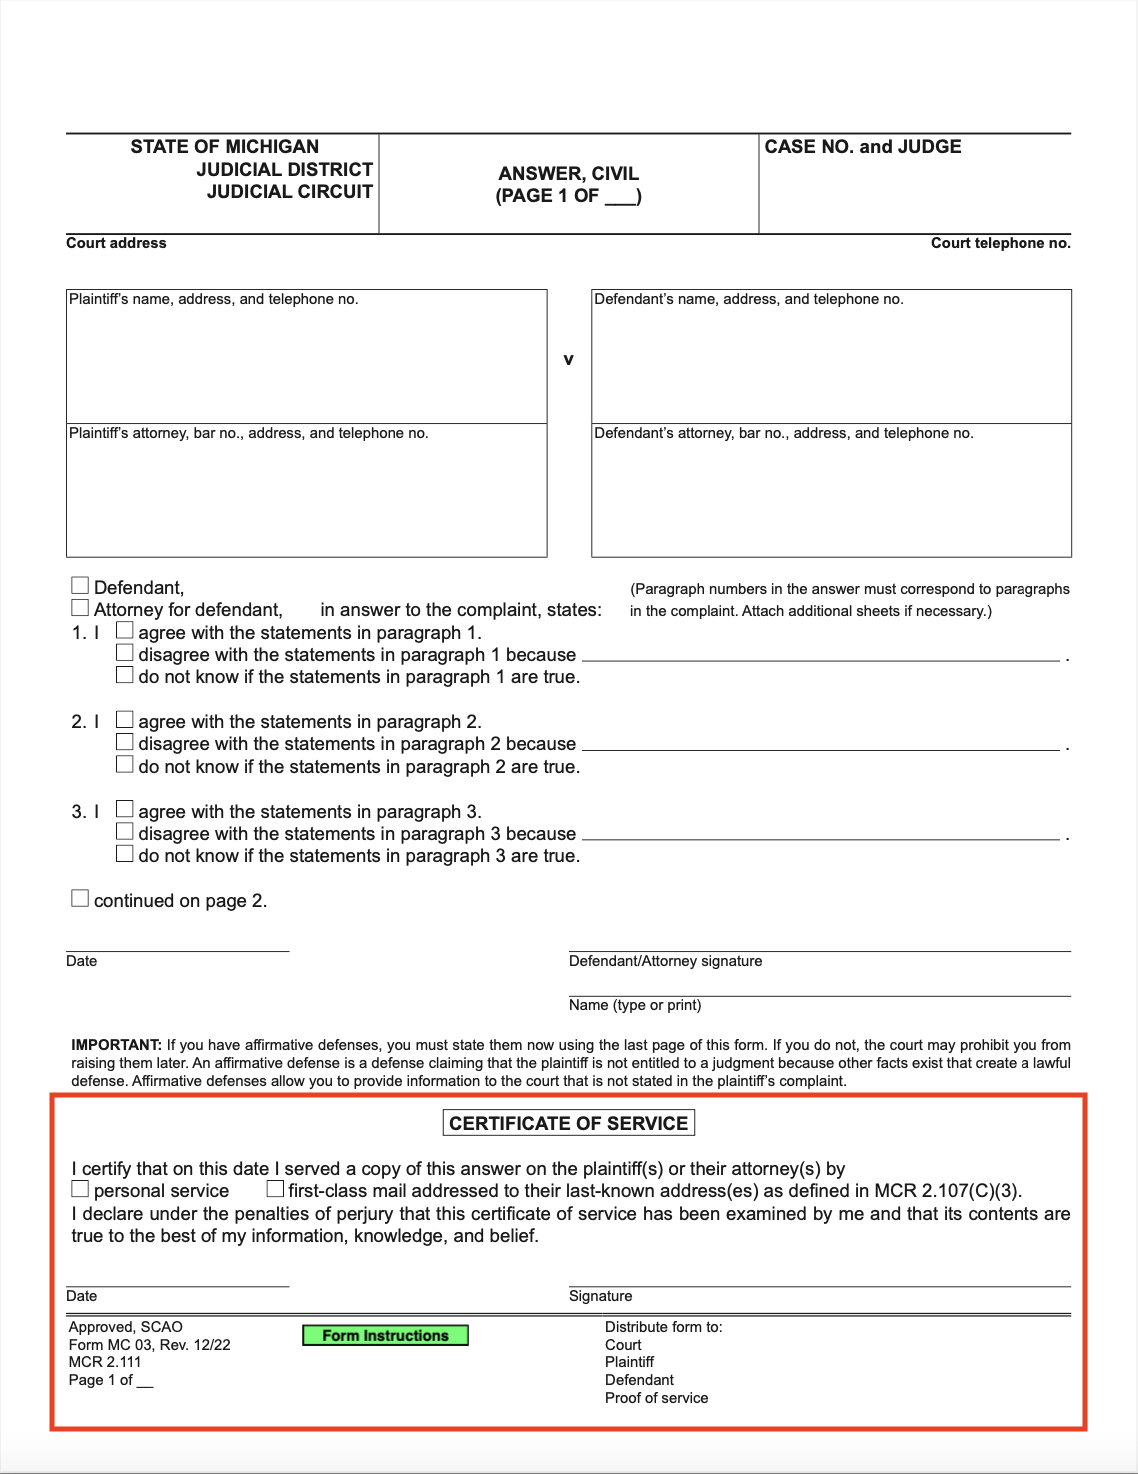 Image of a Michigan Answer form for civil cases with a red box around the Certificate of Service section